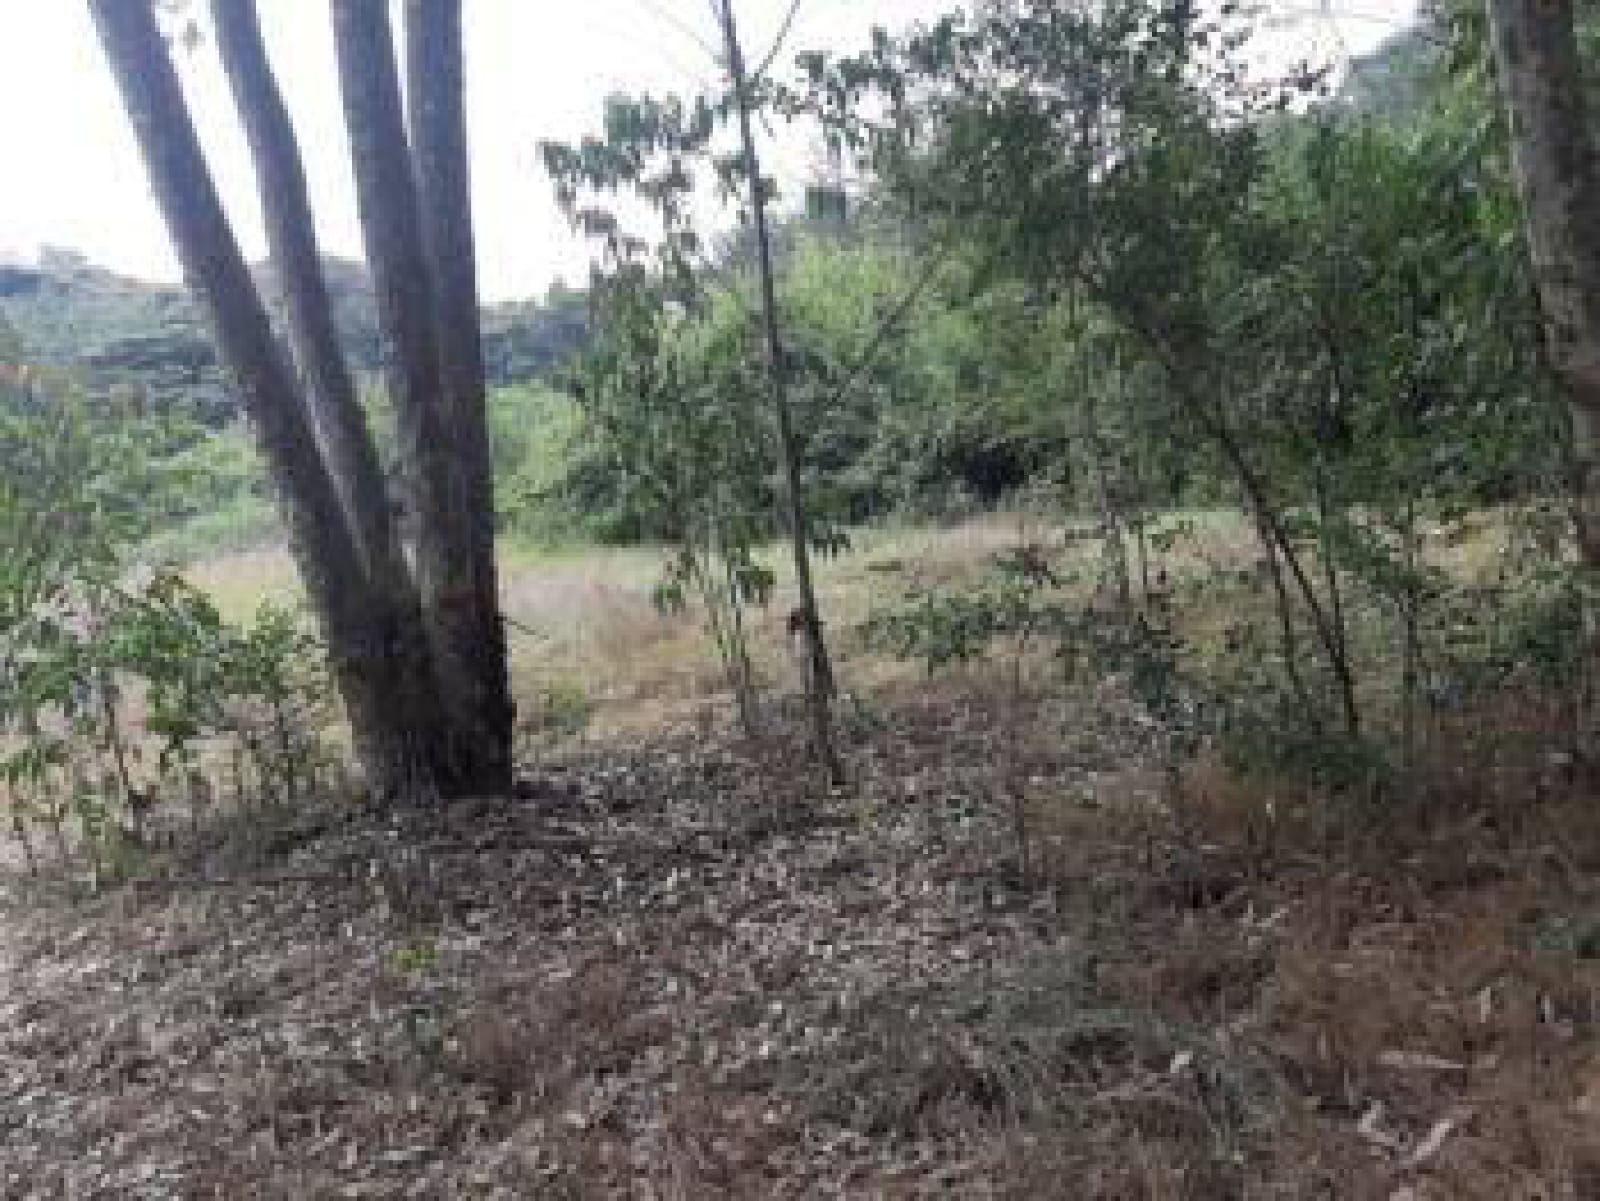 List of 100 Land For Sale In Karen Kenya Ready Clean Title Deed, House For Sale and Rent BEST PRICES acre Acres